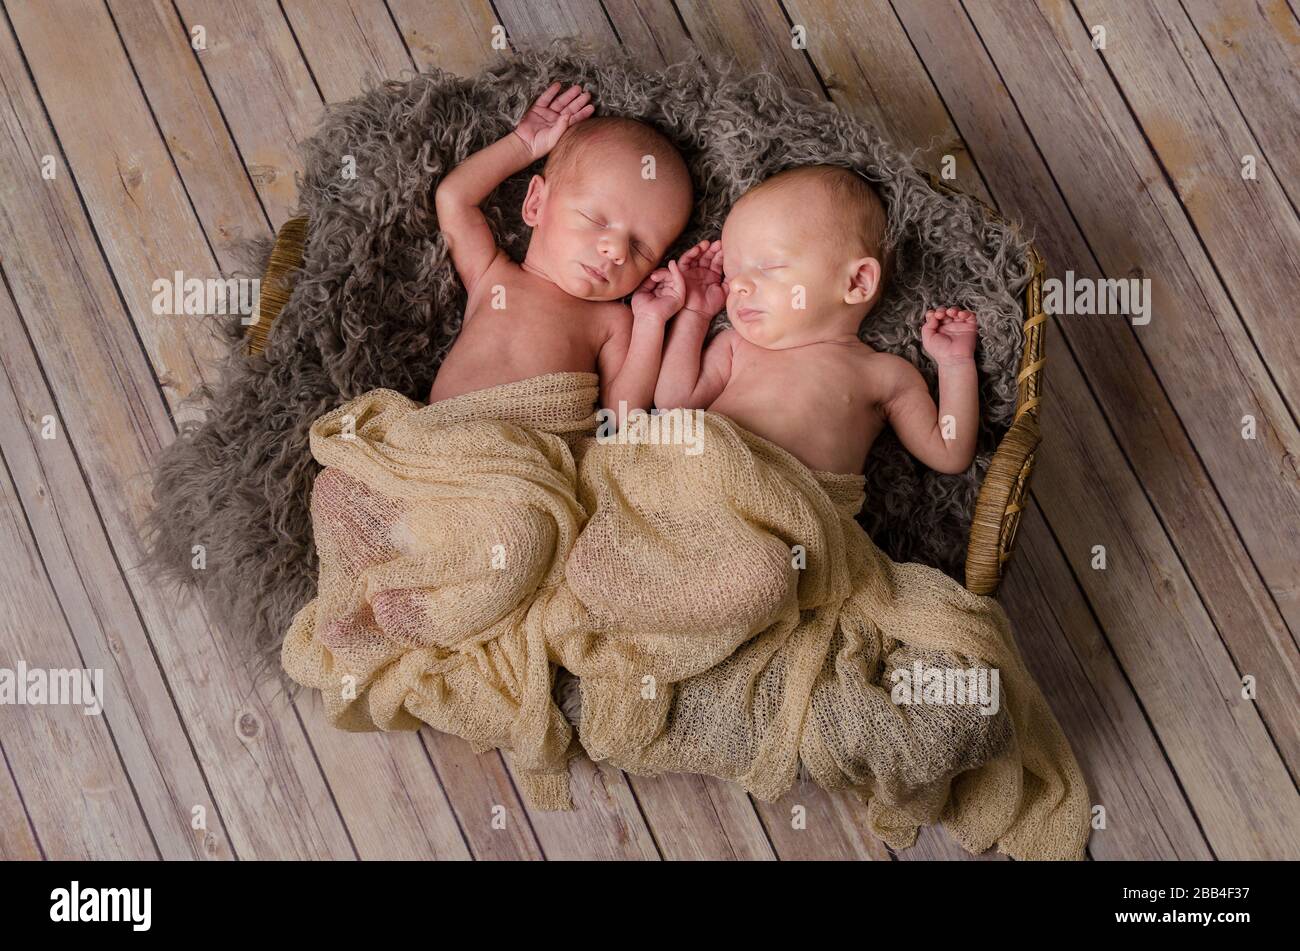 Soft earthtone blankets over a rustic wooden floor Stock Photo